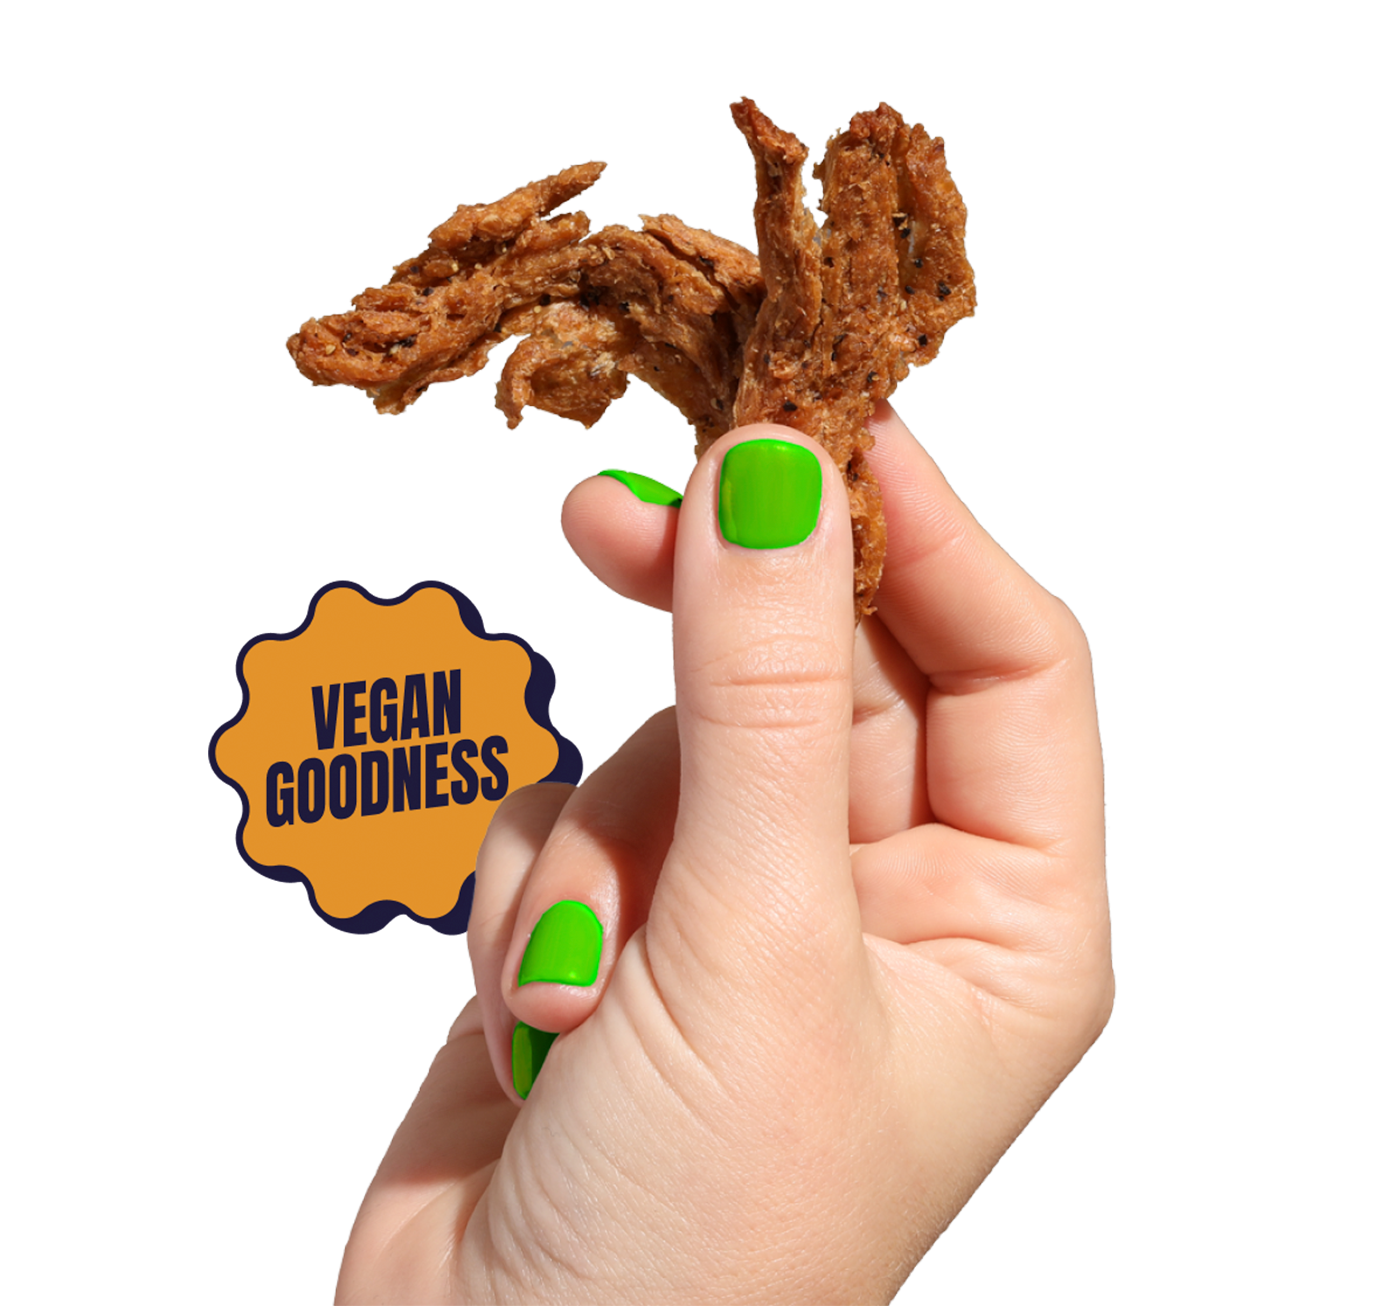 Hand with green painted fingernails holding piece of vegan jerky. Illustrated badge that says "Vegan Goodness"